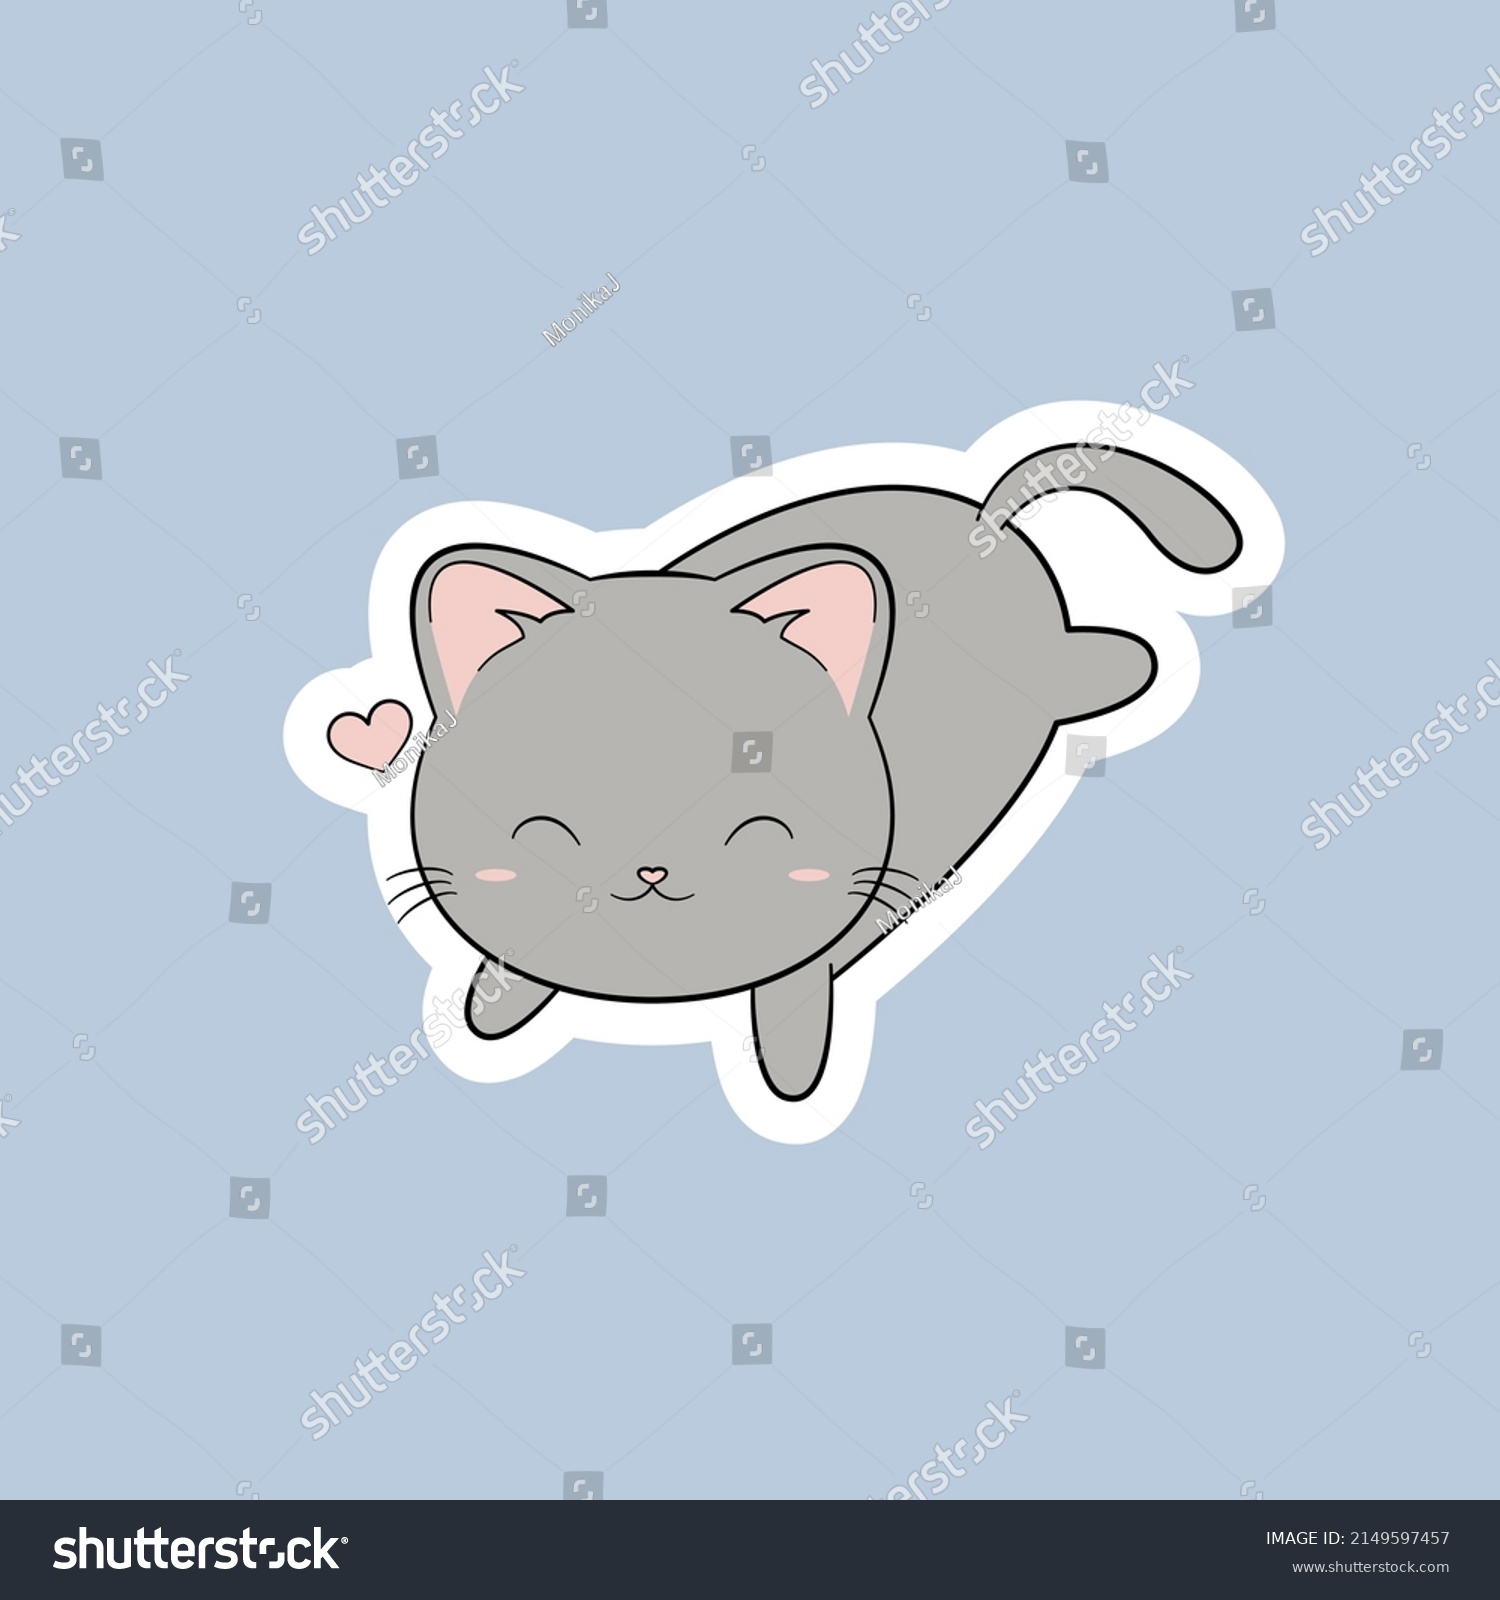 SVG of Cute little kitty on baby blue background. Kawaii animal. Cartoon funny baby character. Kids print for sticker, poster, t-shirt. Flat design. svg